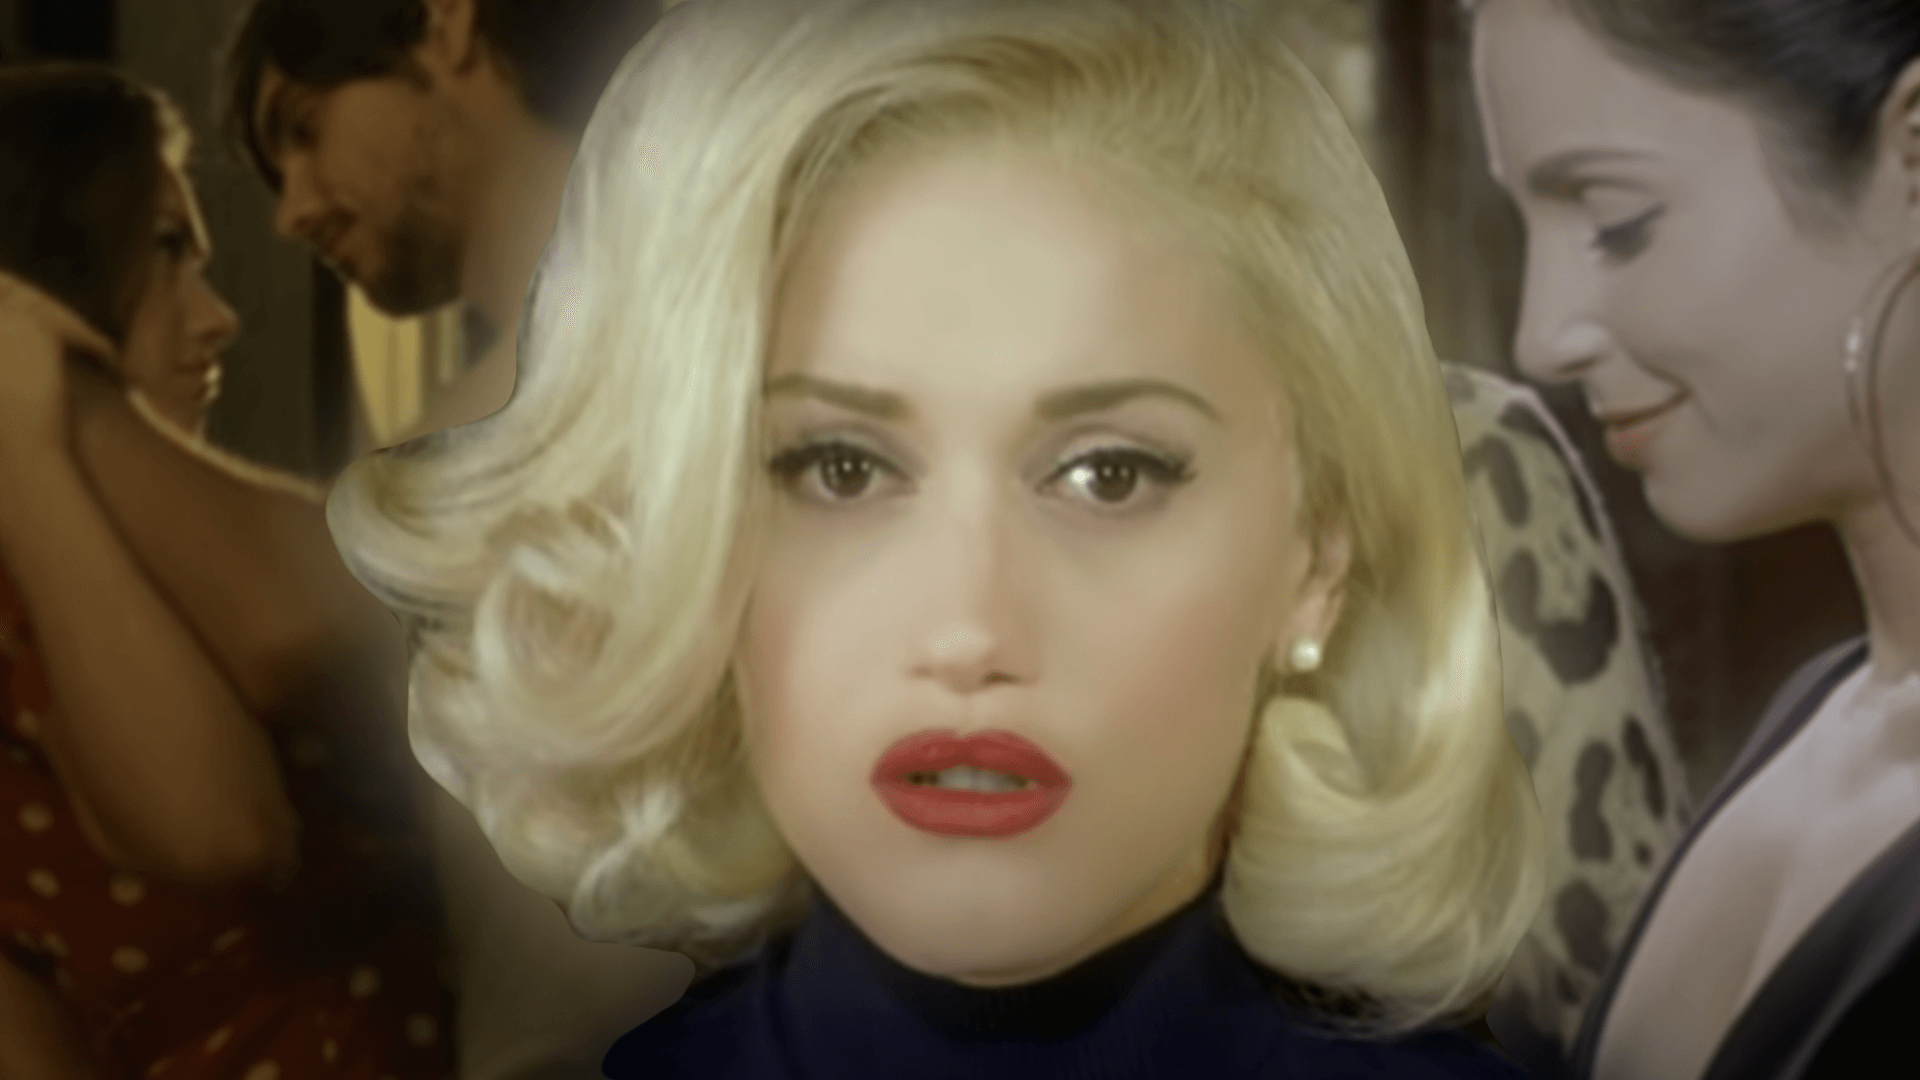 Gwen Stefani in Cool video music clip with blonde hair and polo top on looking sad red lipstick